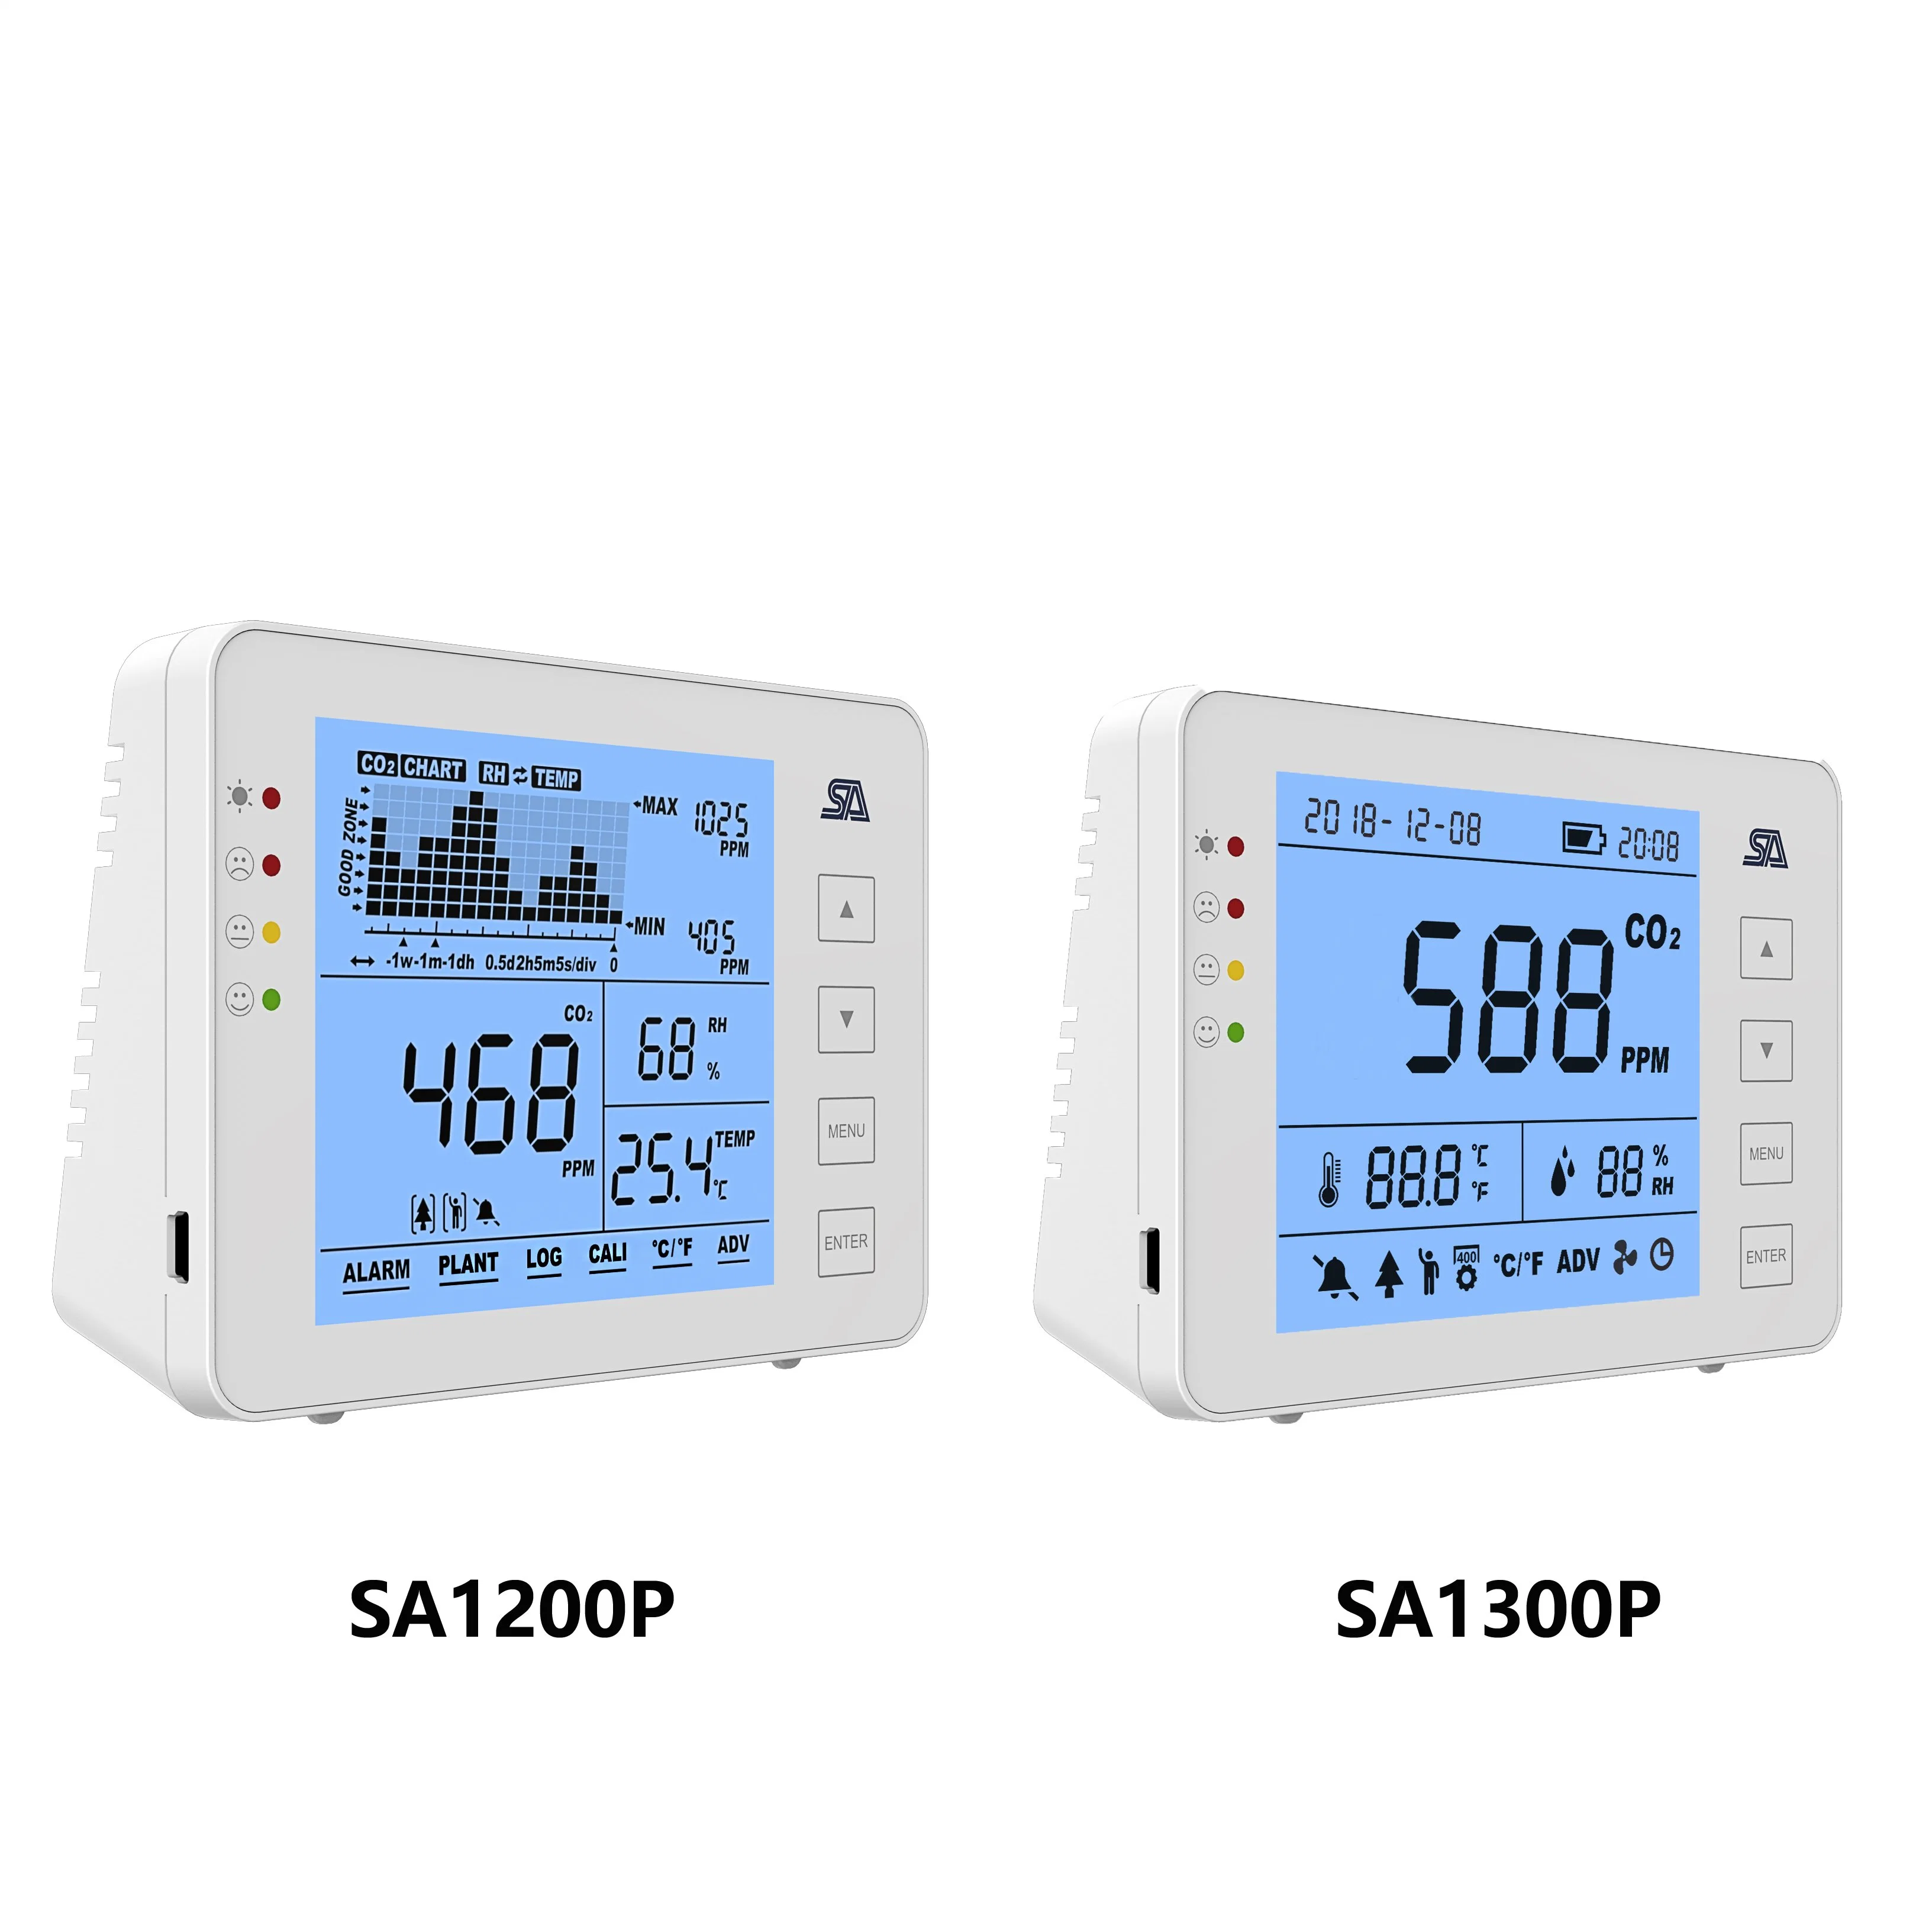 CO2 Meter Household 3 in 1 Meter CO2 Ppm Rh C/F Time Date Indoor Air Quality Monitor CO2 Detector